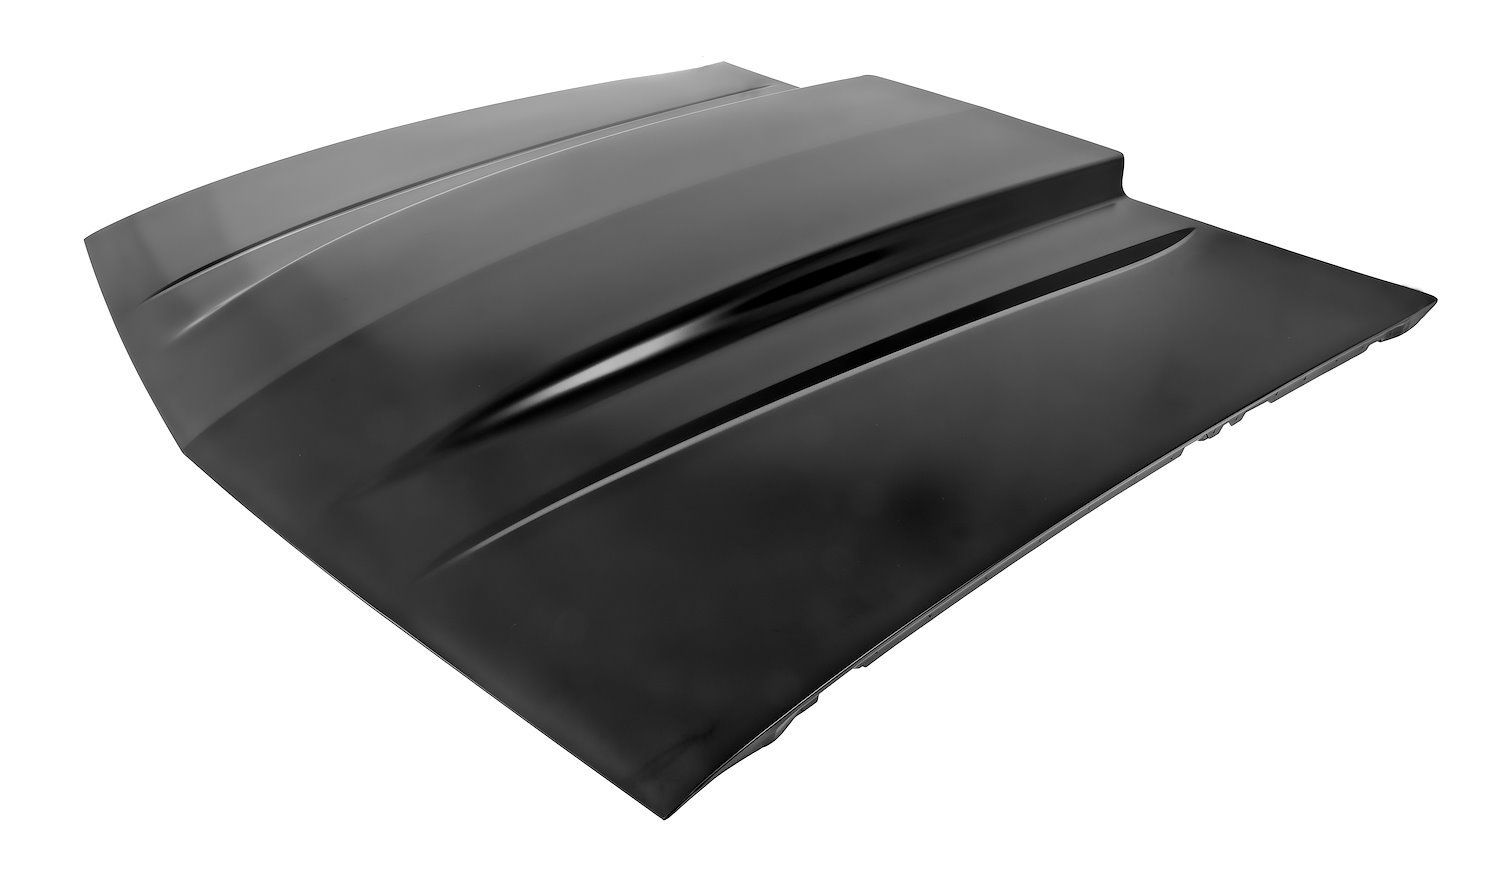 Steel Cowl Induction Hood for 1982-1992 Chevrolet Camaro [2 in. Cowl Induction Scoop]